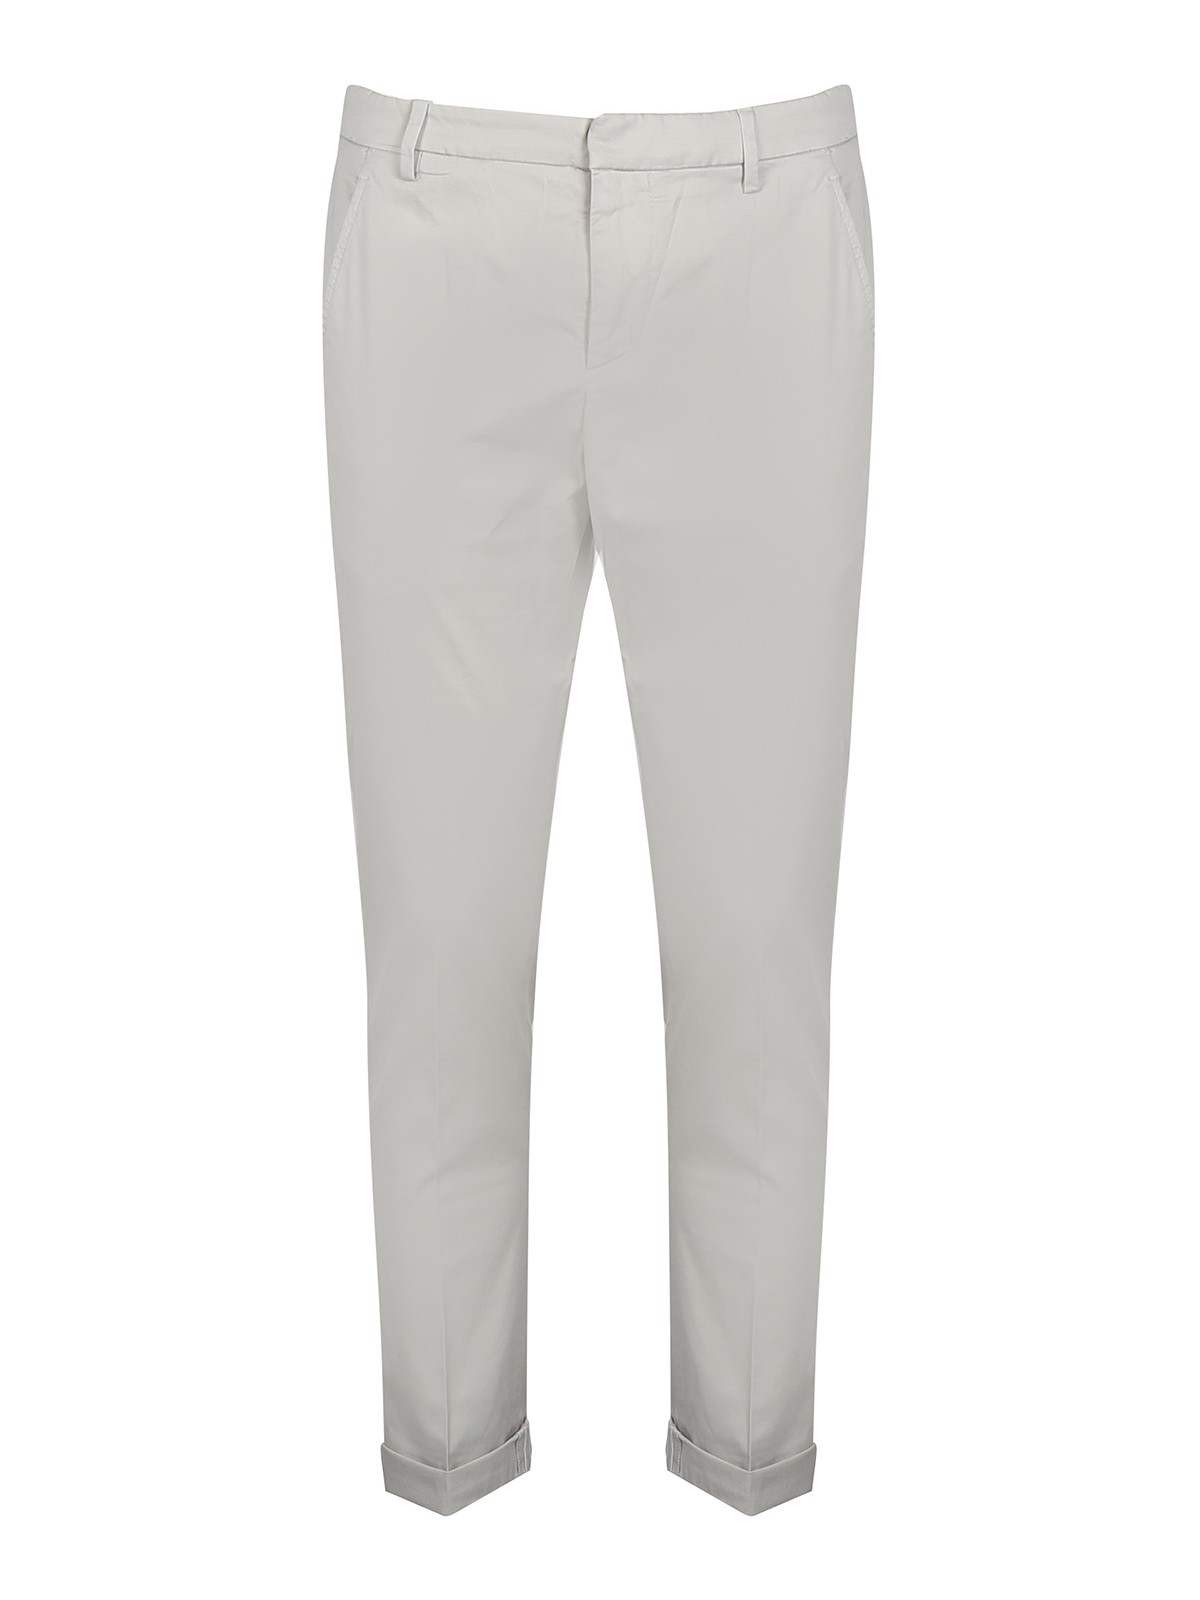 Dondup Casual Cotton Trousers With Concealed Zip In Grey